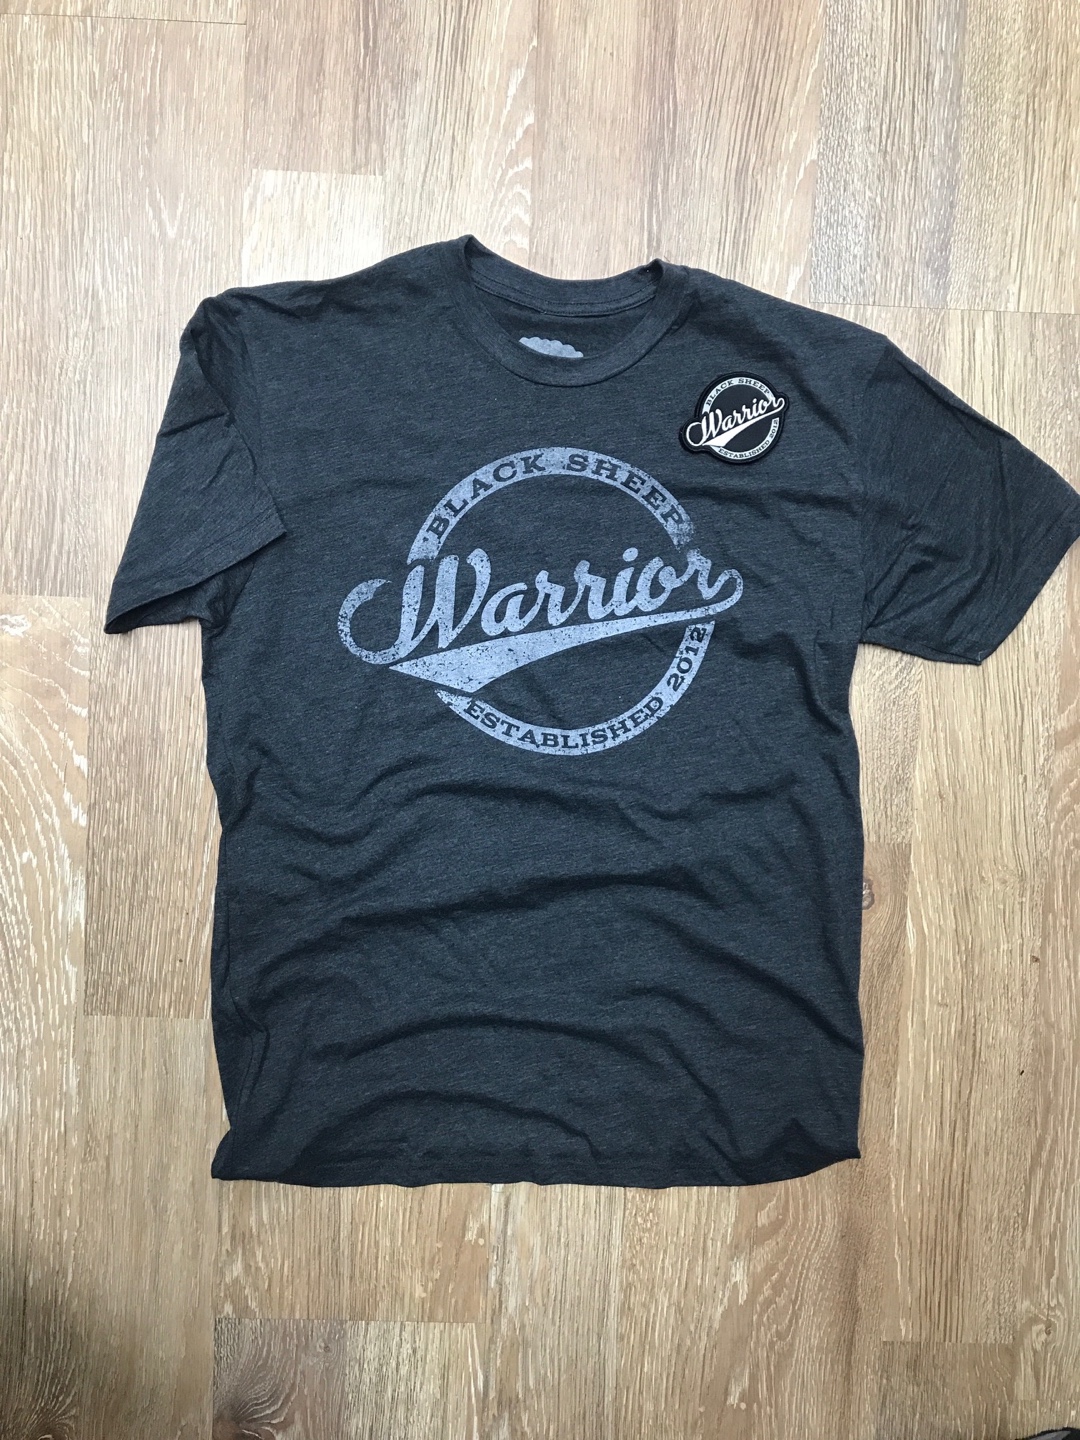 Black Sheep Warrior Announces Their Vintage T-shirt and Matching Patch ...